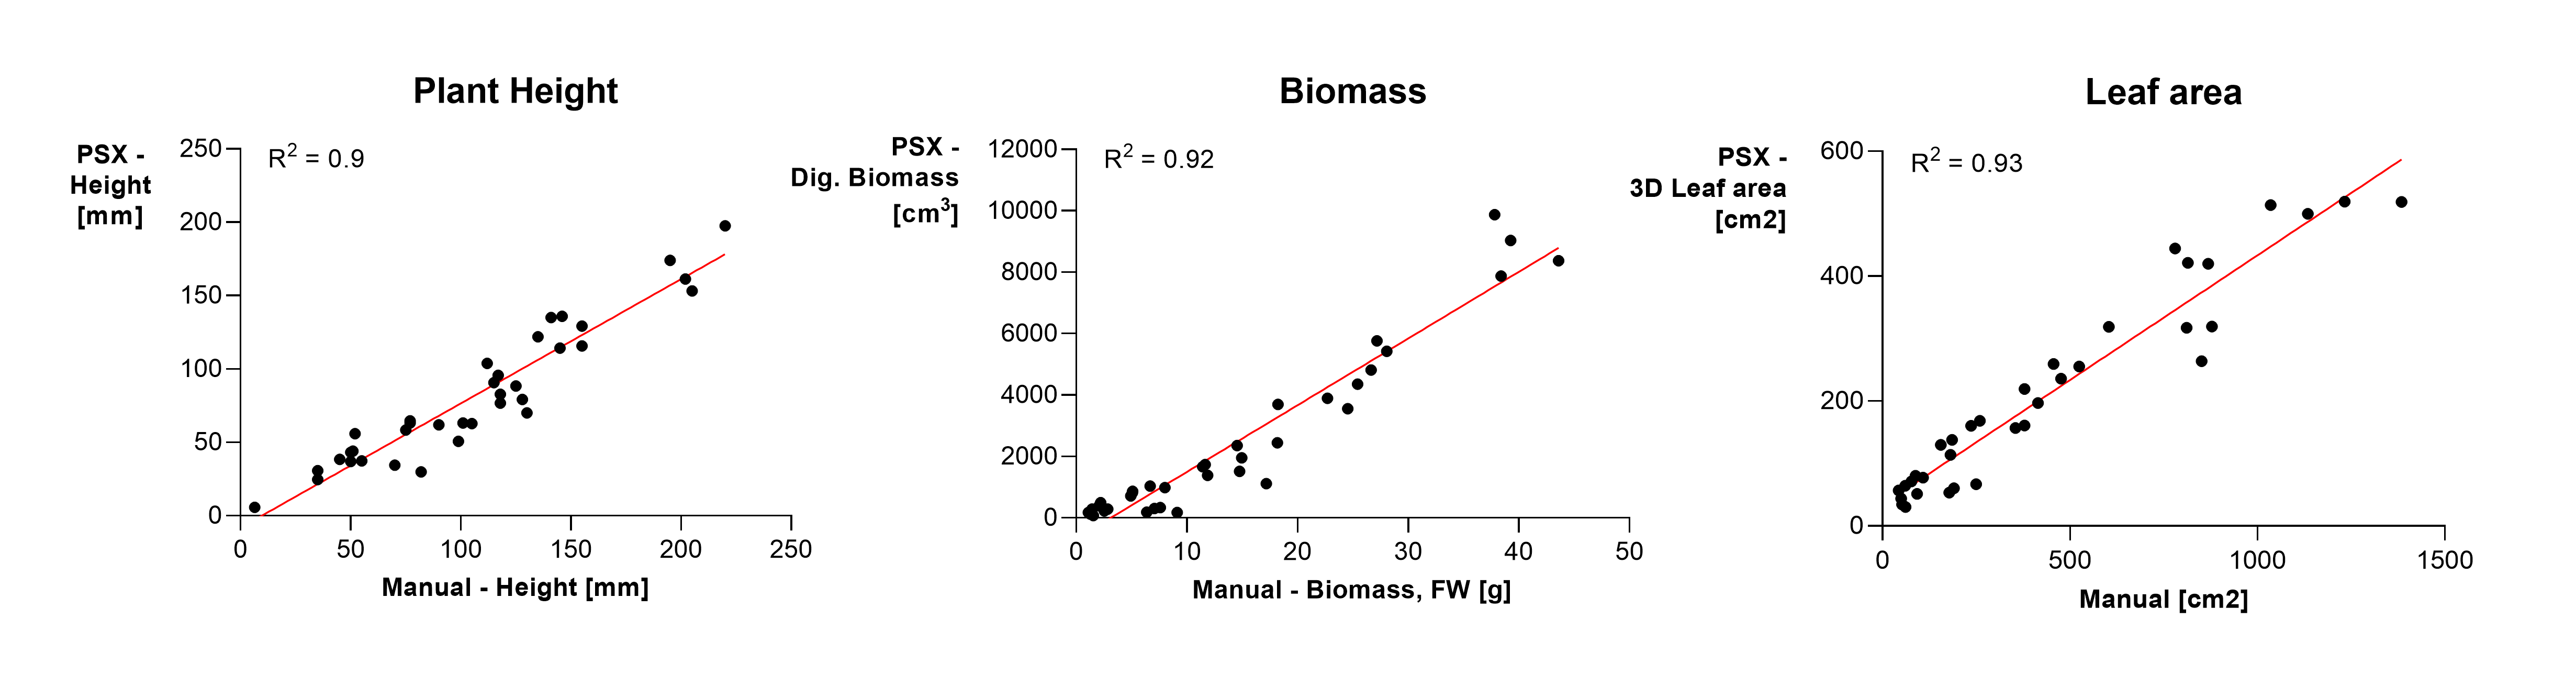 Figure 1. (click to enlarge) Scatterplots with trendlines (red) of manually collected data (x-axes) versus data collected by the Phenospex (y-axes), n=37. To test the reliability of the Phenospex plant scanner we tested the correlation of several plant traits, i.e. (a) plant height, (b) biomass, and (c) leaf area. R2 values of all plots were &gt; 0.9 indicating a strong correlation between PlantEye data and manual measurements.